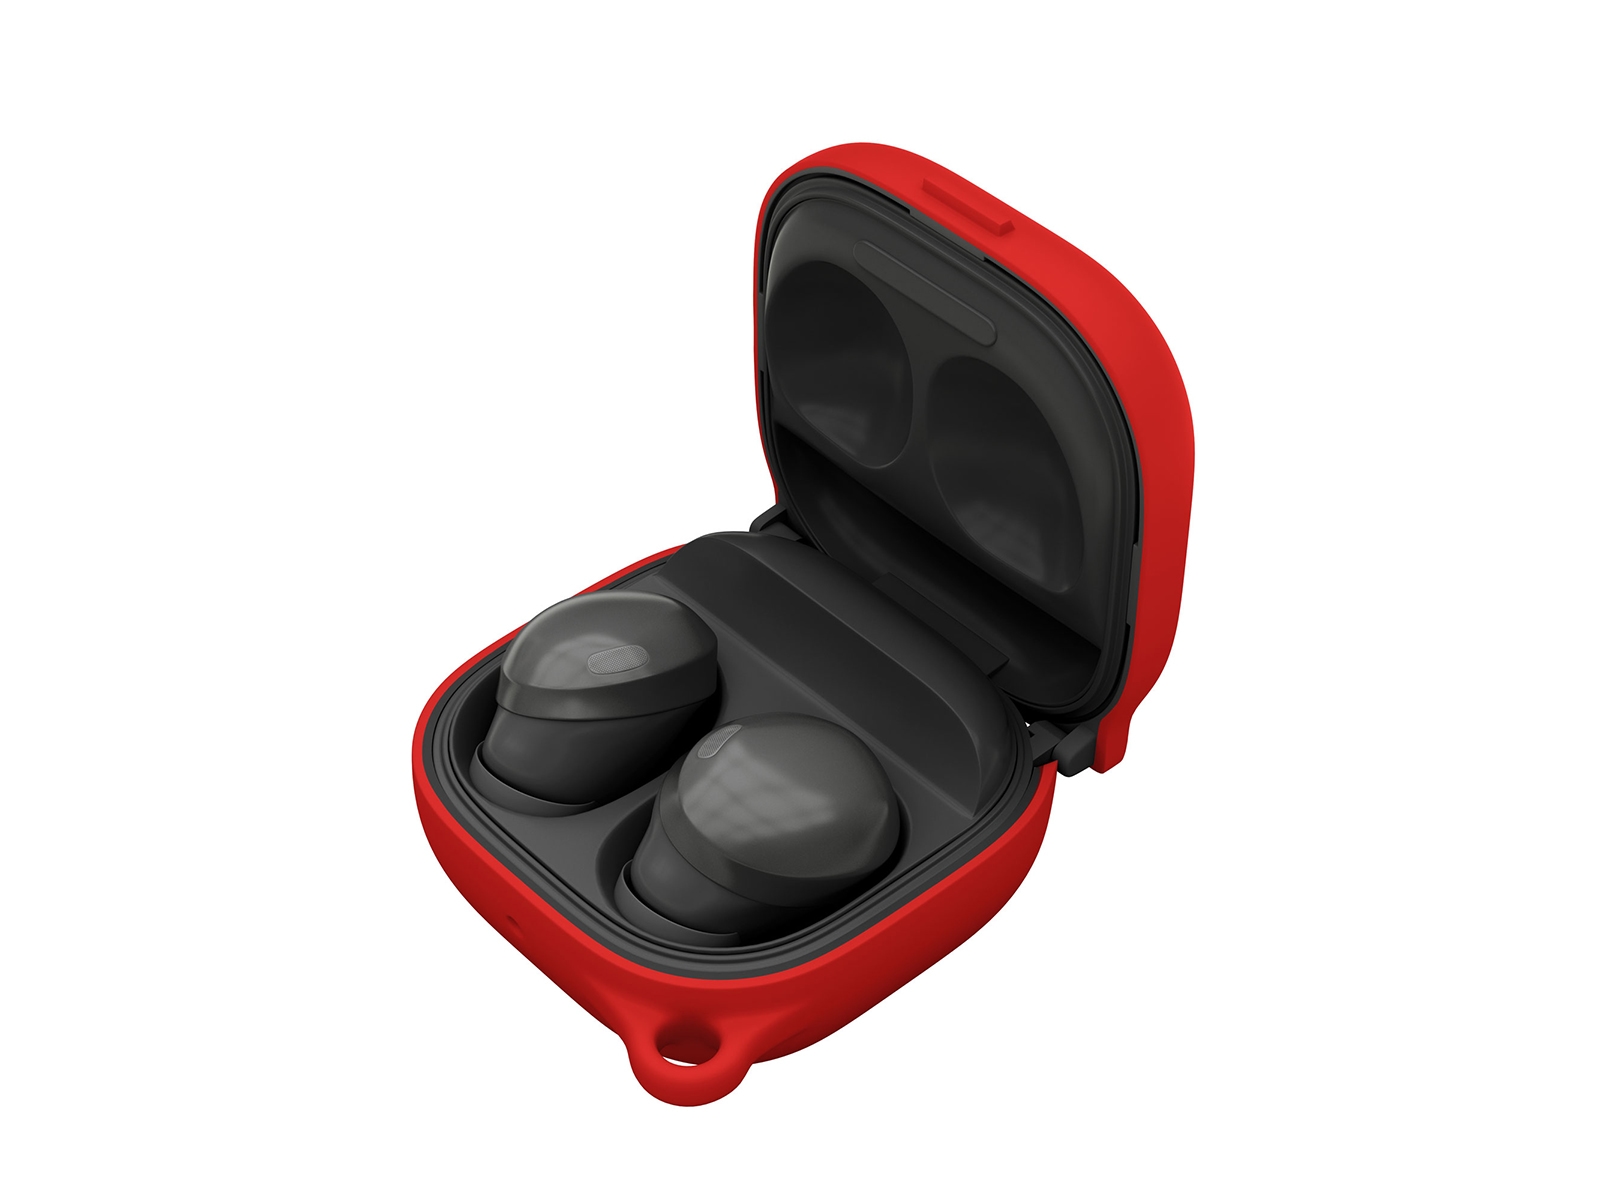 Samsung Galaxy Buds Pro 2 Case Covers